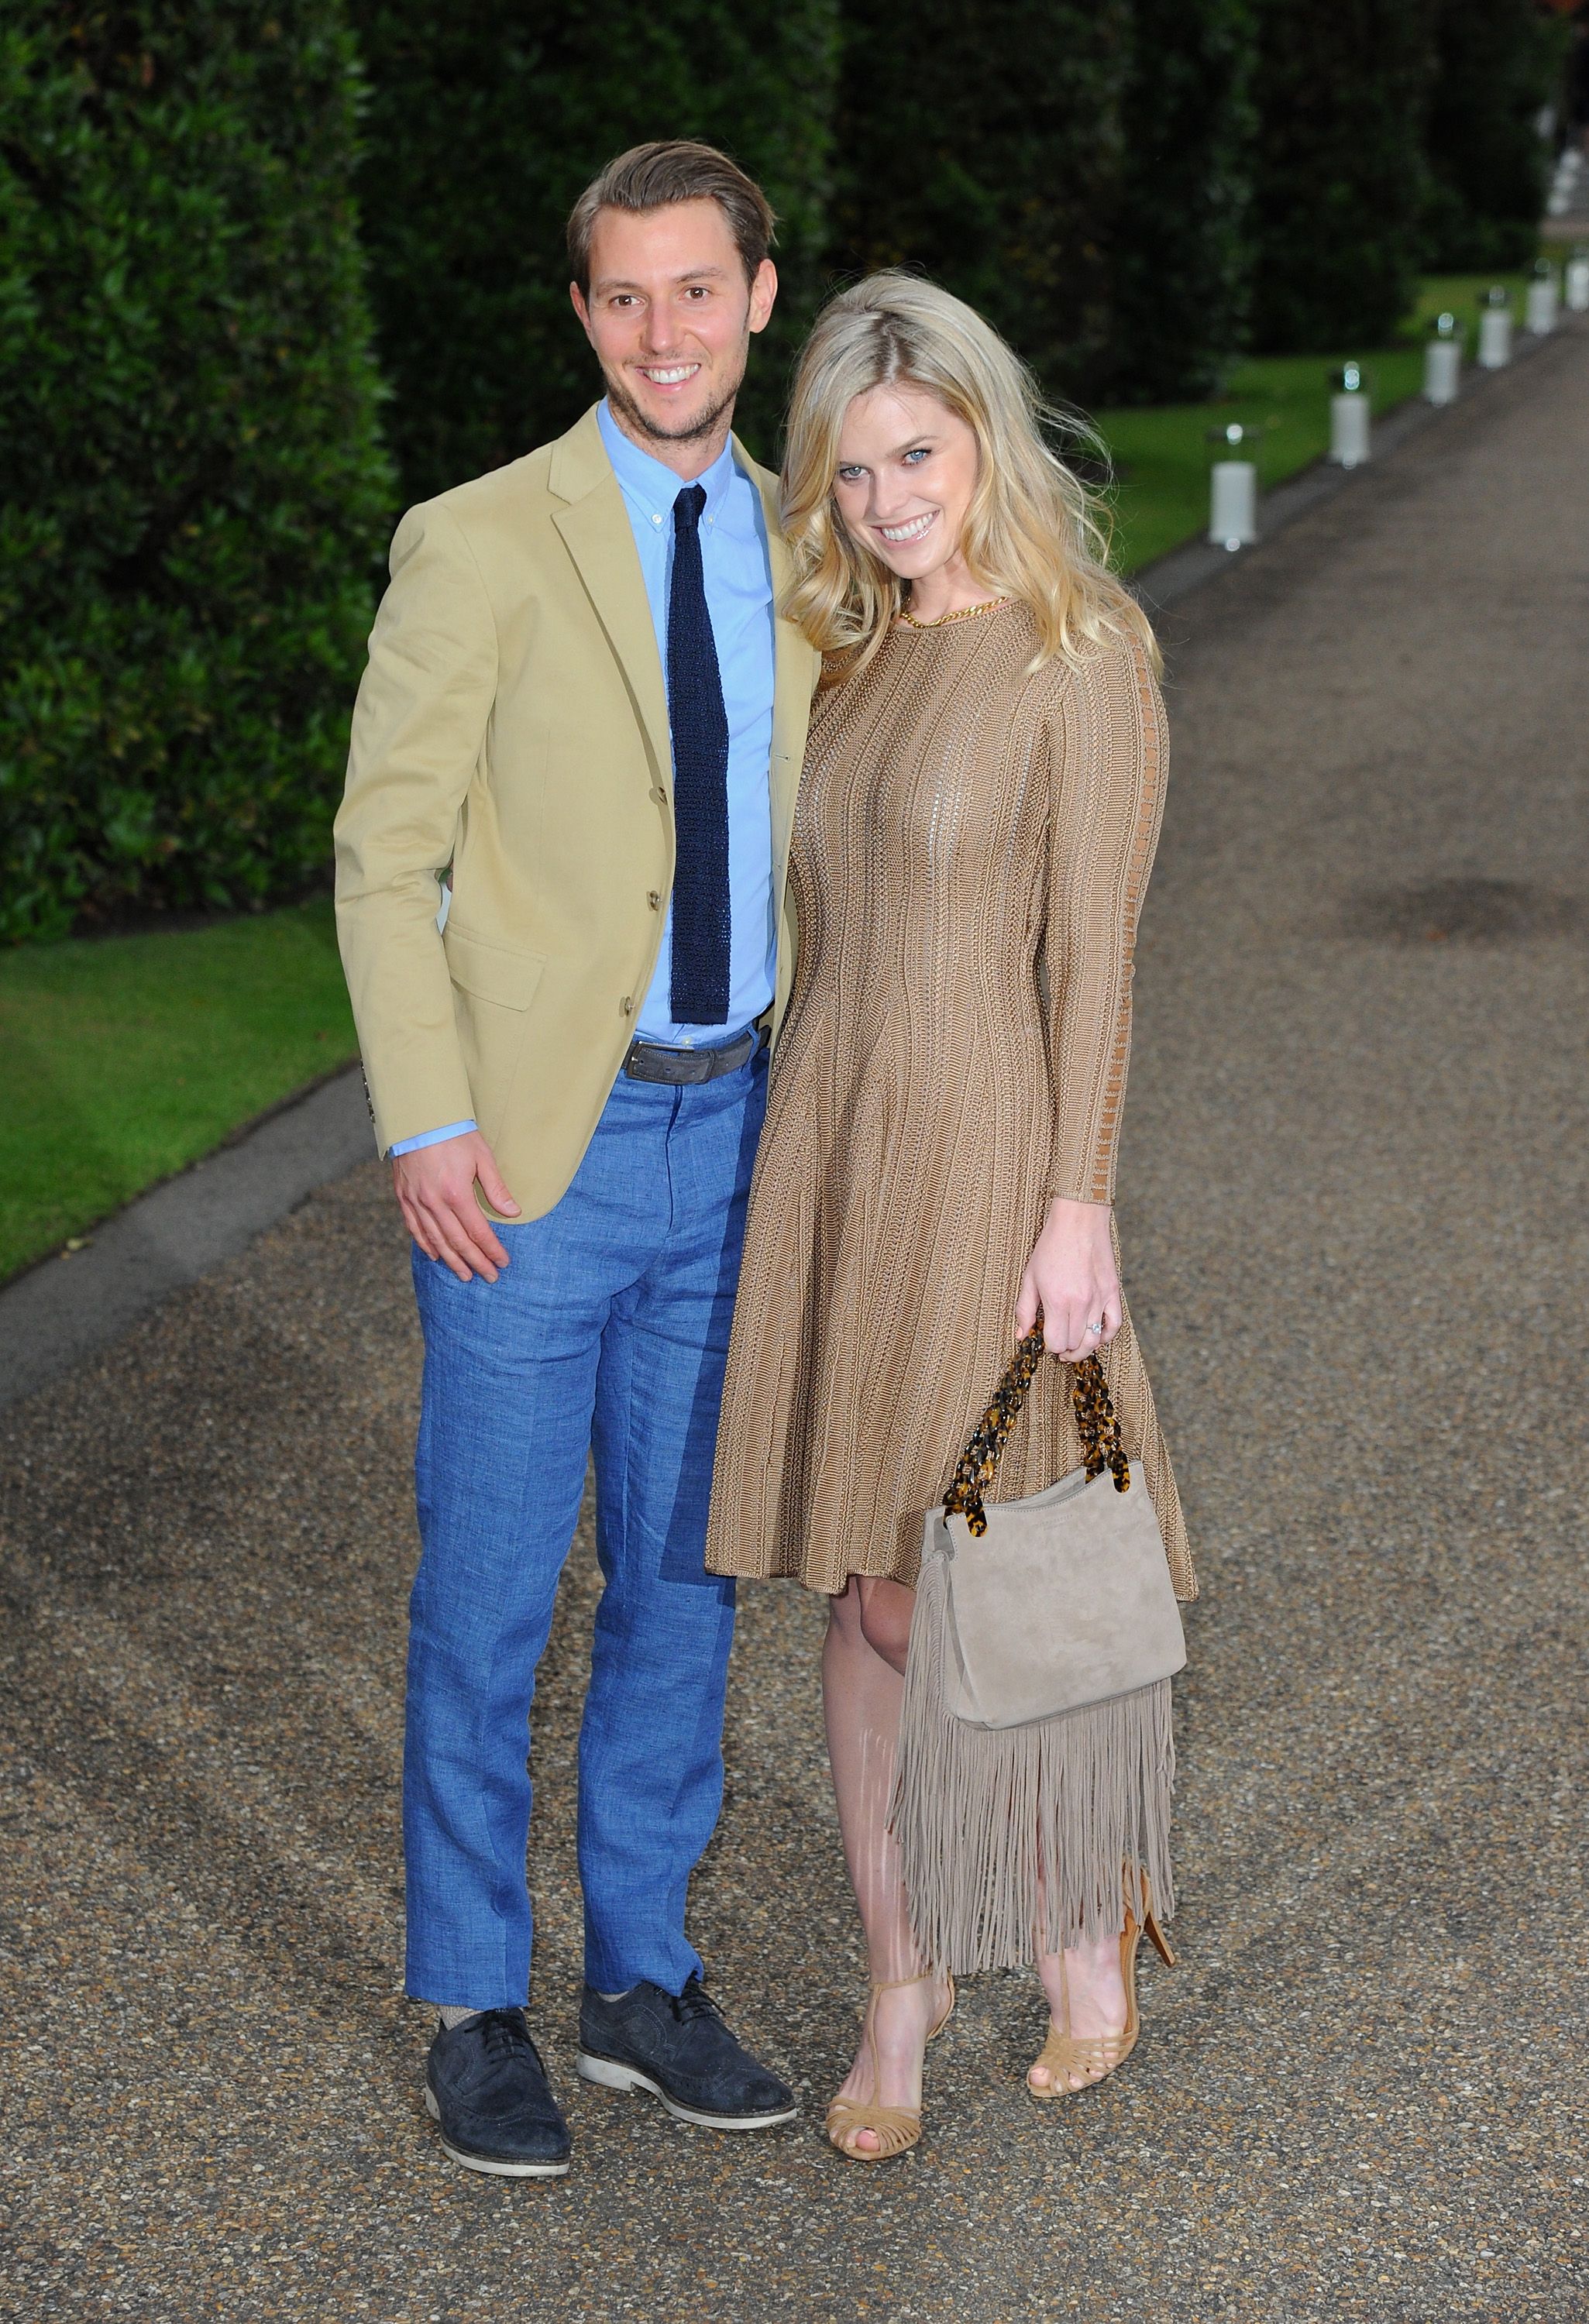 Alex Cowper-Smith and Alice Eve during the Vogue and Ralph Lauren Wimbledon party at The Orangery on June 22, 2015, in London, England. | Source: Getty Images